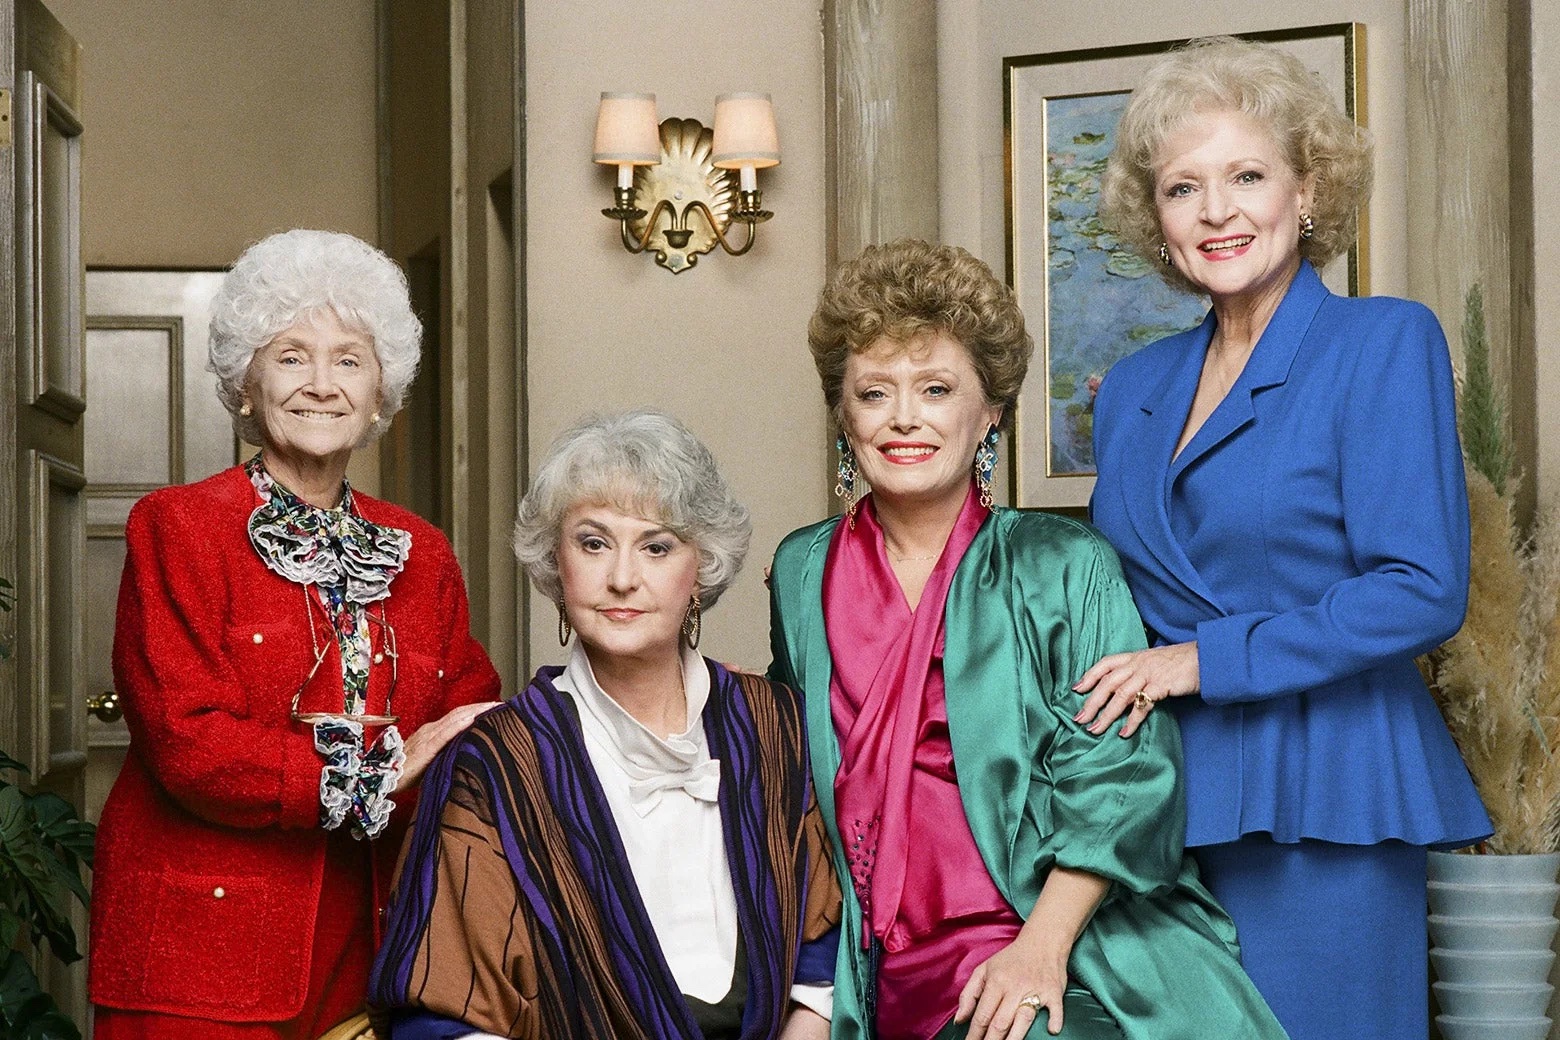 From left to right: Estelle Getty, Bea Arthur, Rue McClanahan, and Betty White in The Golden Girls